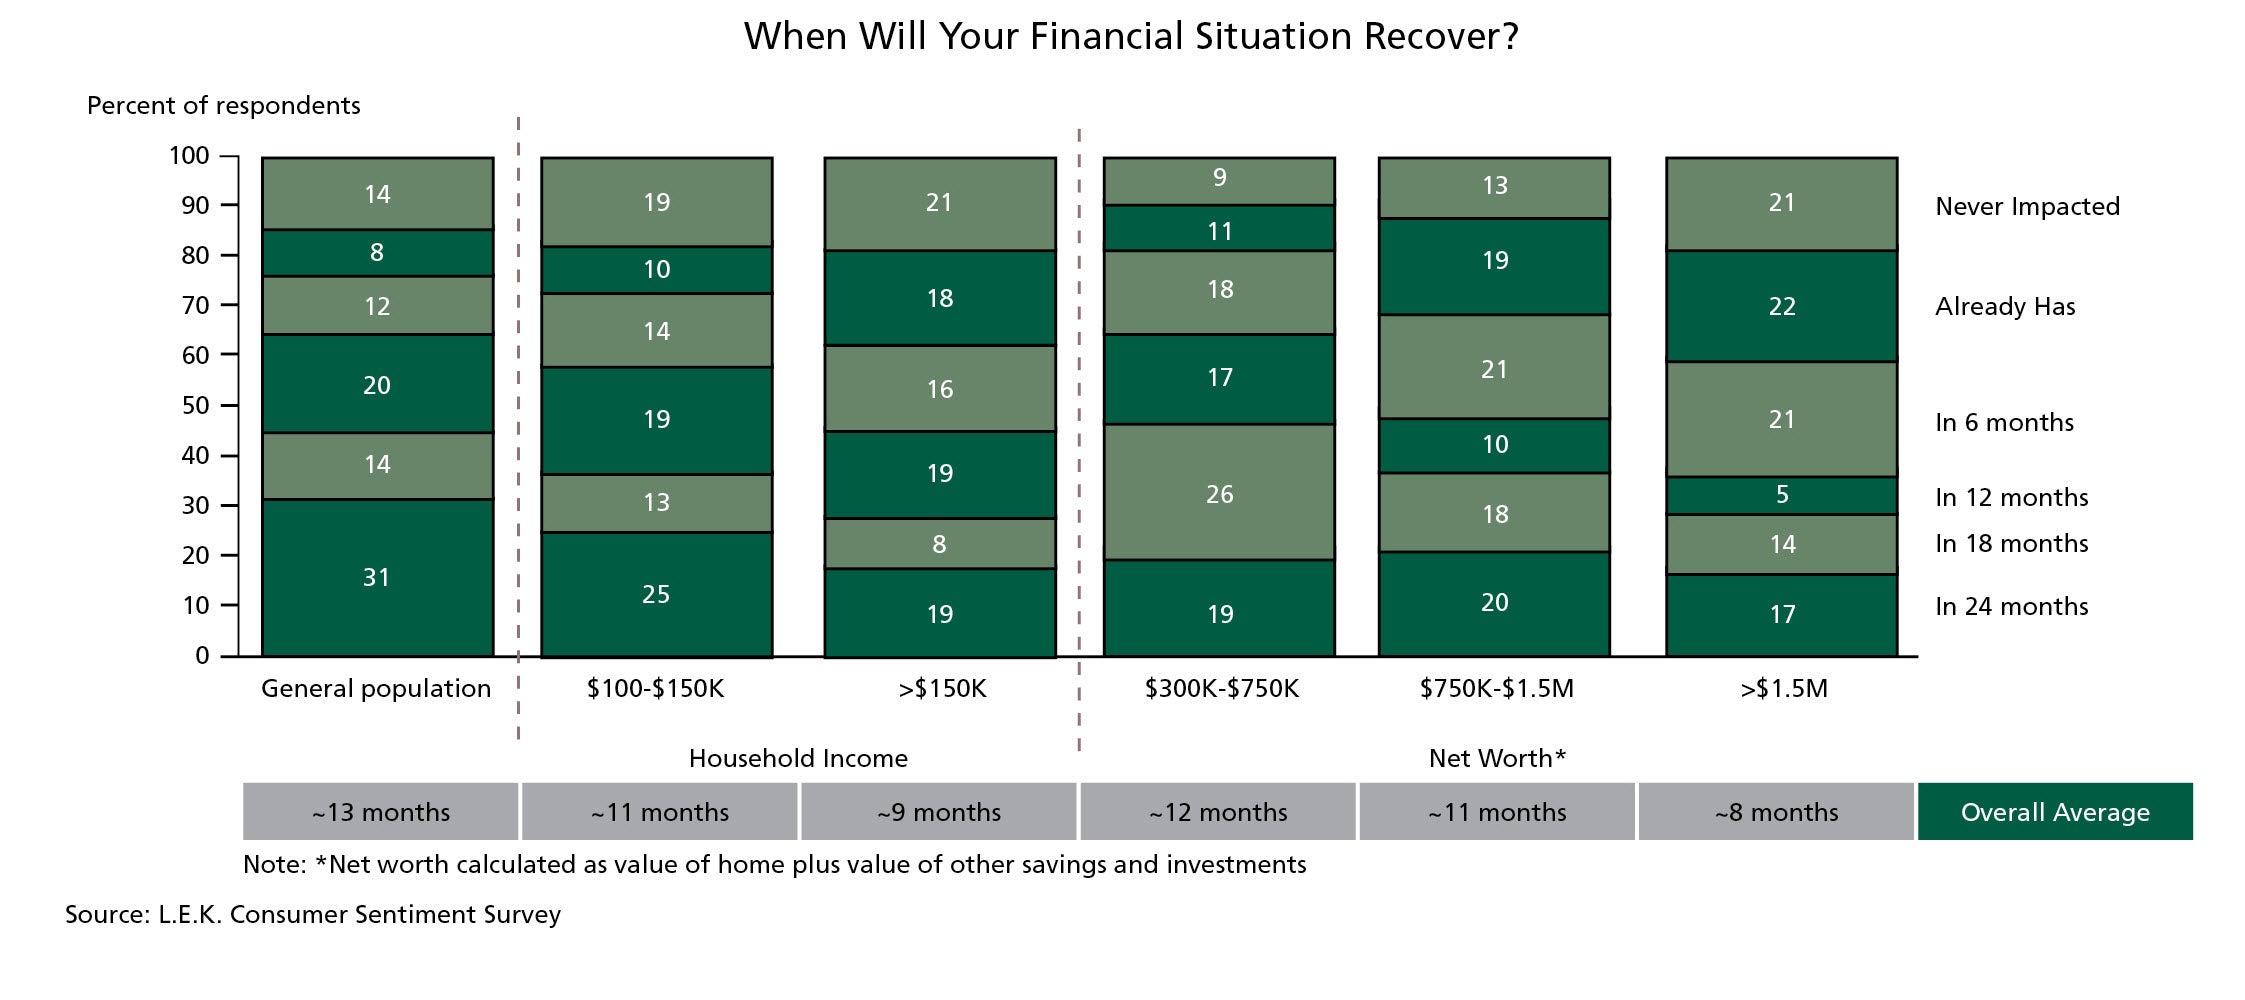 When Will Your Financial Situation Recover?